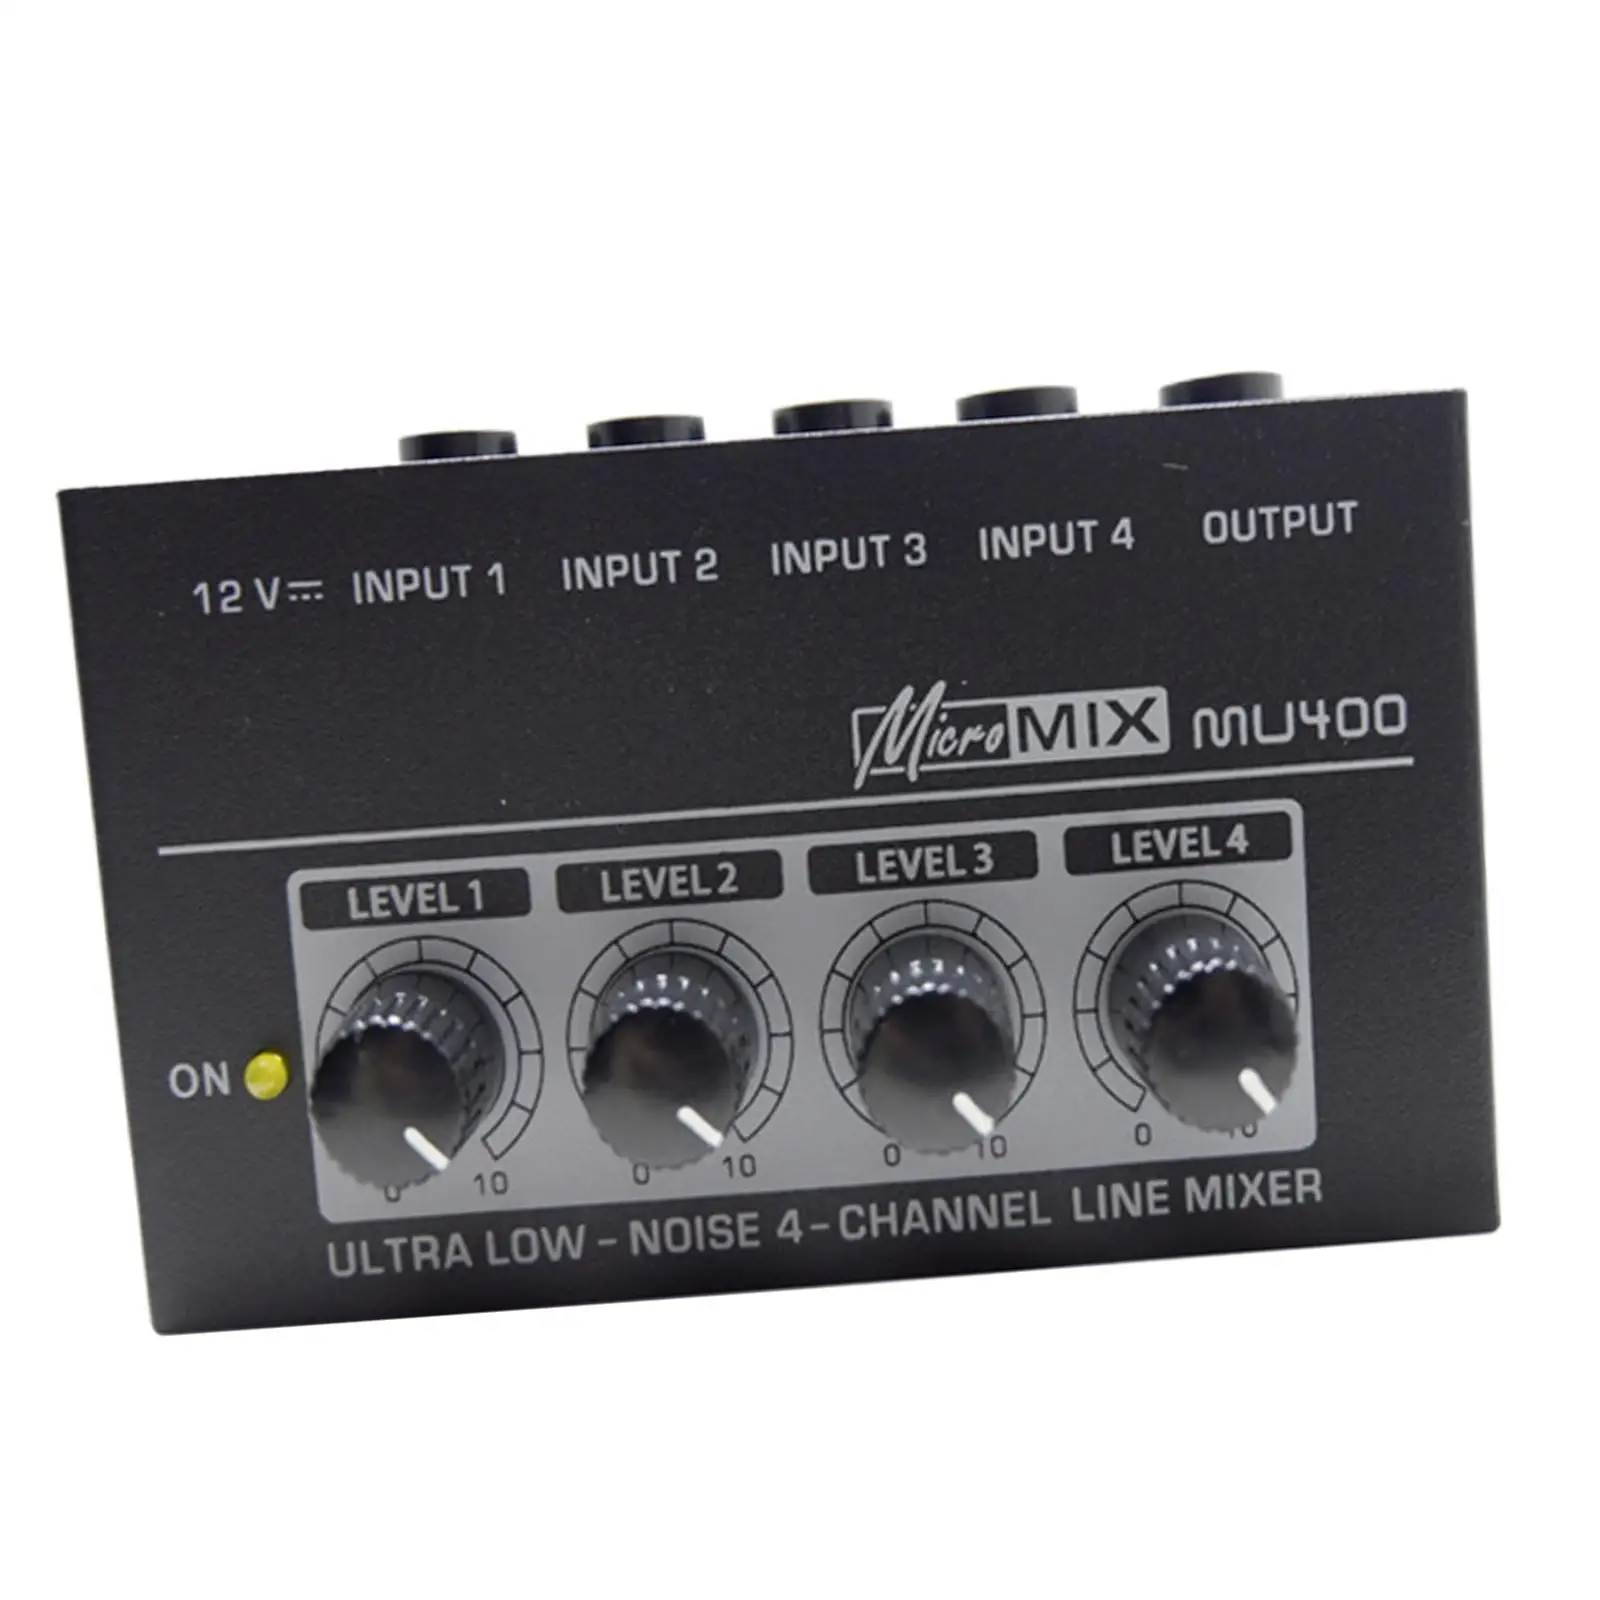 Mini Audio Mixer High Sound Quality 12V 4 Input Audio Mixer for Small Clubs or Bars CD Player Computer Recording Live and Studio